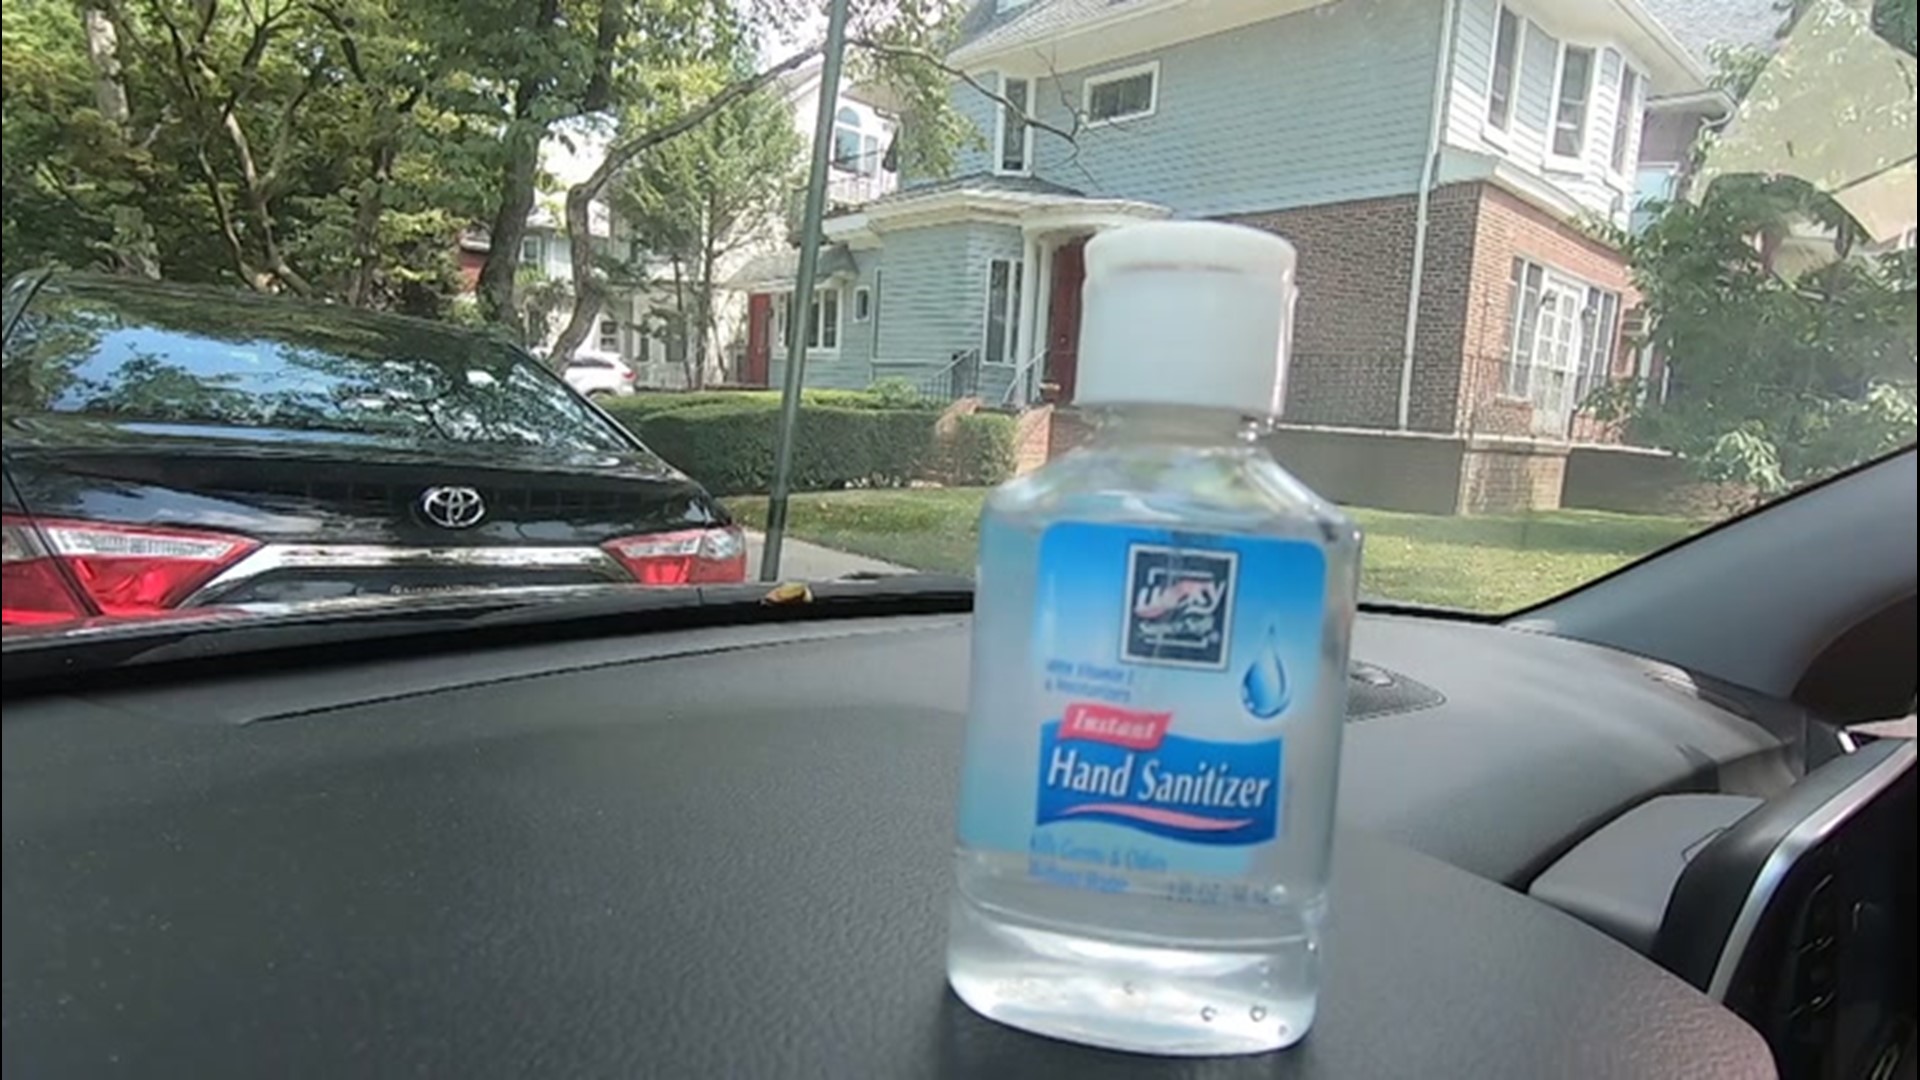 Hand sanitizer use has increased during the coronavirus pandemic. Dexter Henry looks into what happens if you don't safely place it in your car.